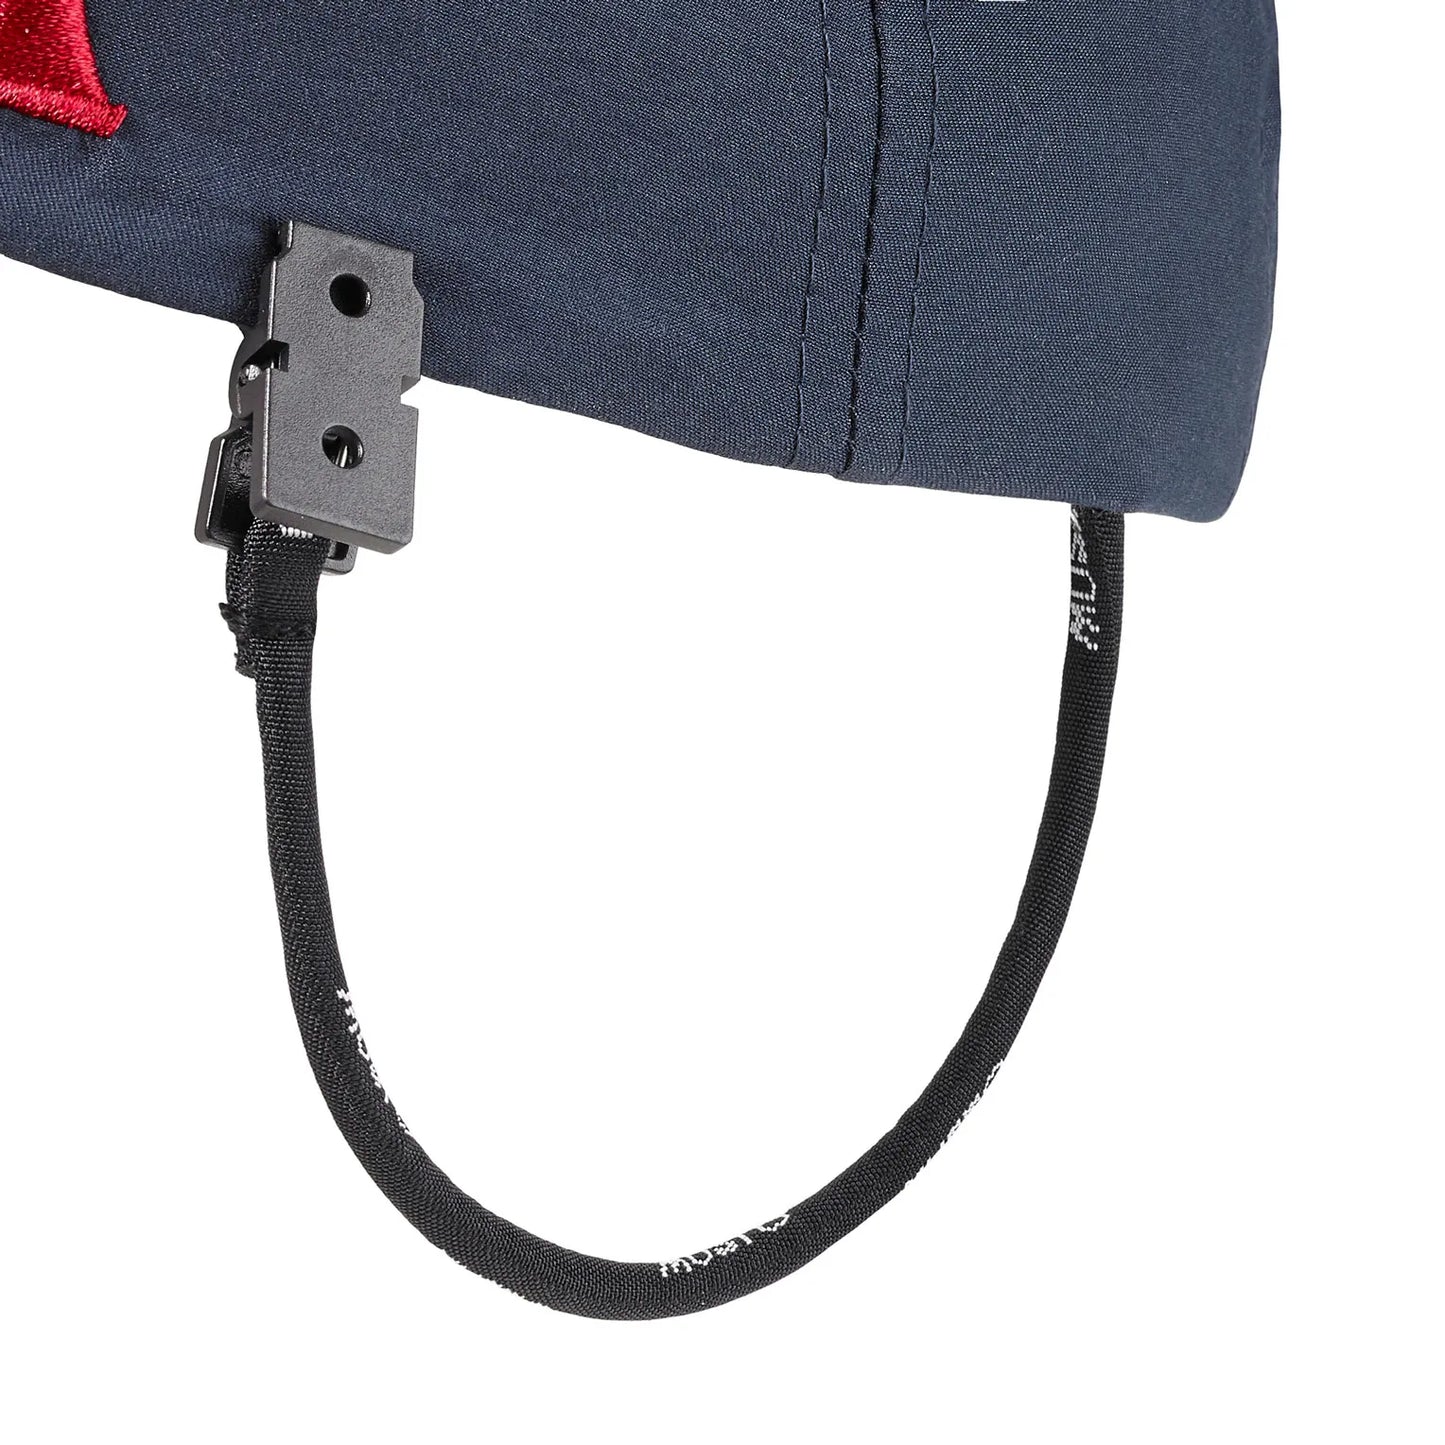 Fast Dry Musto Cap, Navy with X-Yachts logo